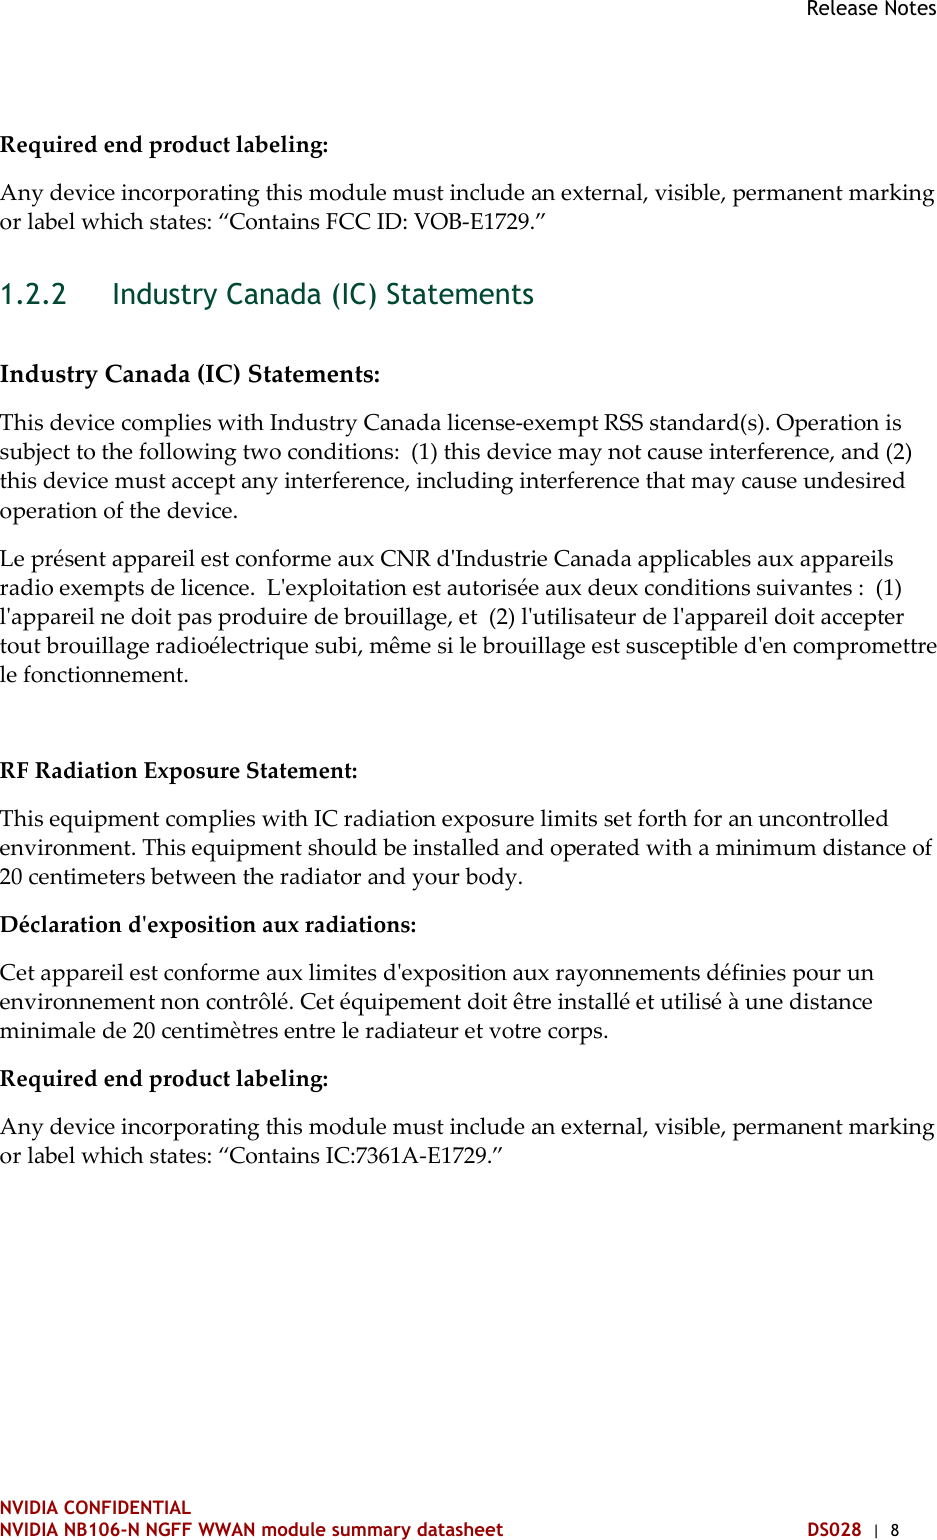 Release Notes   NVIDIA CONFIDENTIAL NVIDIA NB106-N NGFF WWAN module summary datasheet DS028  |  8 Required end product labeling:  Any device incorporating this module must include an external, visible, permanent marking or label which states: “Contains FCC ID: VOB-E1729.”  Industry Canada (IC) Statements 1.2.2 Industry Canada (IC) Statements: This device complies with Industry Canada license-exempt RSS standard(s). Operation is subject to the following two conditions:  (1) this device may not cause interference, and (2) this device must accept any interference, including interference that may cause undesired operation of the device. Le présent appareil est conforme aux CNR d&apos;Industrie Canada applicables aux appareils radio exempts de licence.  L&apos;exploitation est autorisée aux deux conditions suivantes :  (1) l&apos;appareil ne doit pas produire de brouillage, et  (2) l&apos;utilisateur de l&apos;appareil doit accepter tout brouillage radioélectrique subi, même si le brouillage est susceptible d&apos;en compromettre le fonctionnement.  RF Radiation Exposure Statement: This equipment complies with IC radiation exposure limits set forth for an uncontrolled environment. This equipment should be installed and operated with a minimum distance of 20 centimeters between the radiator and your body. Déclaration d&apos;exposition aux radiations:  Cet appareil est conforme aux limites d&apos;exposition aux rayonnements définies pour un environnement non contrôlé. Cet équipement doit être installé et utilisé à une distance minimale de 20 centimètres entre le radiateur et votre corps. Required end product labeling: Any device incorporating this module must include an external, visible, permanent marking or label which states: “Contains IC:7361A-E1729.”   